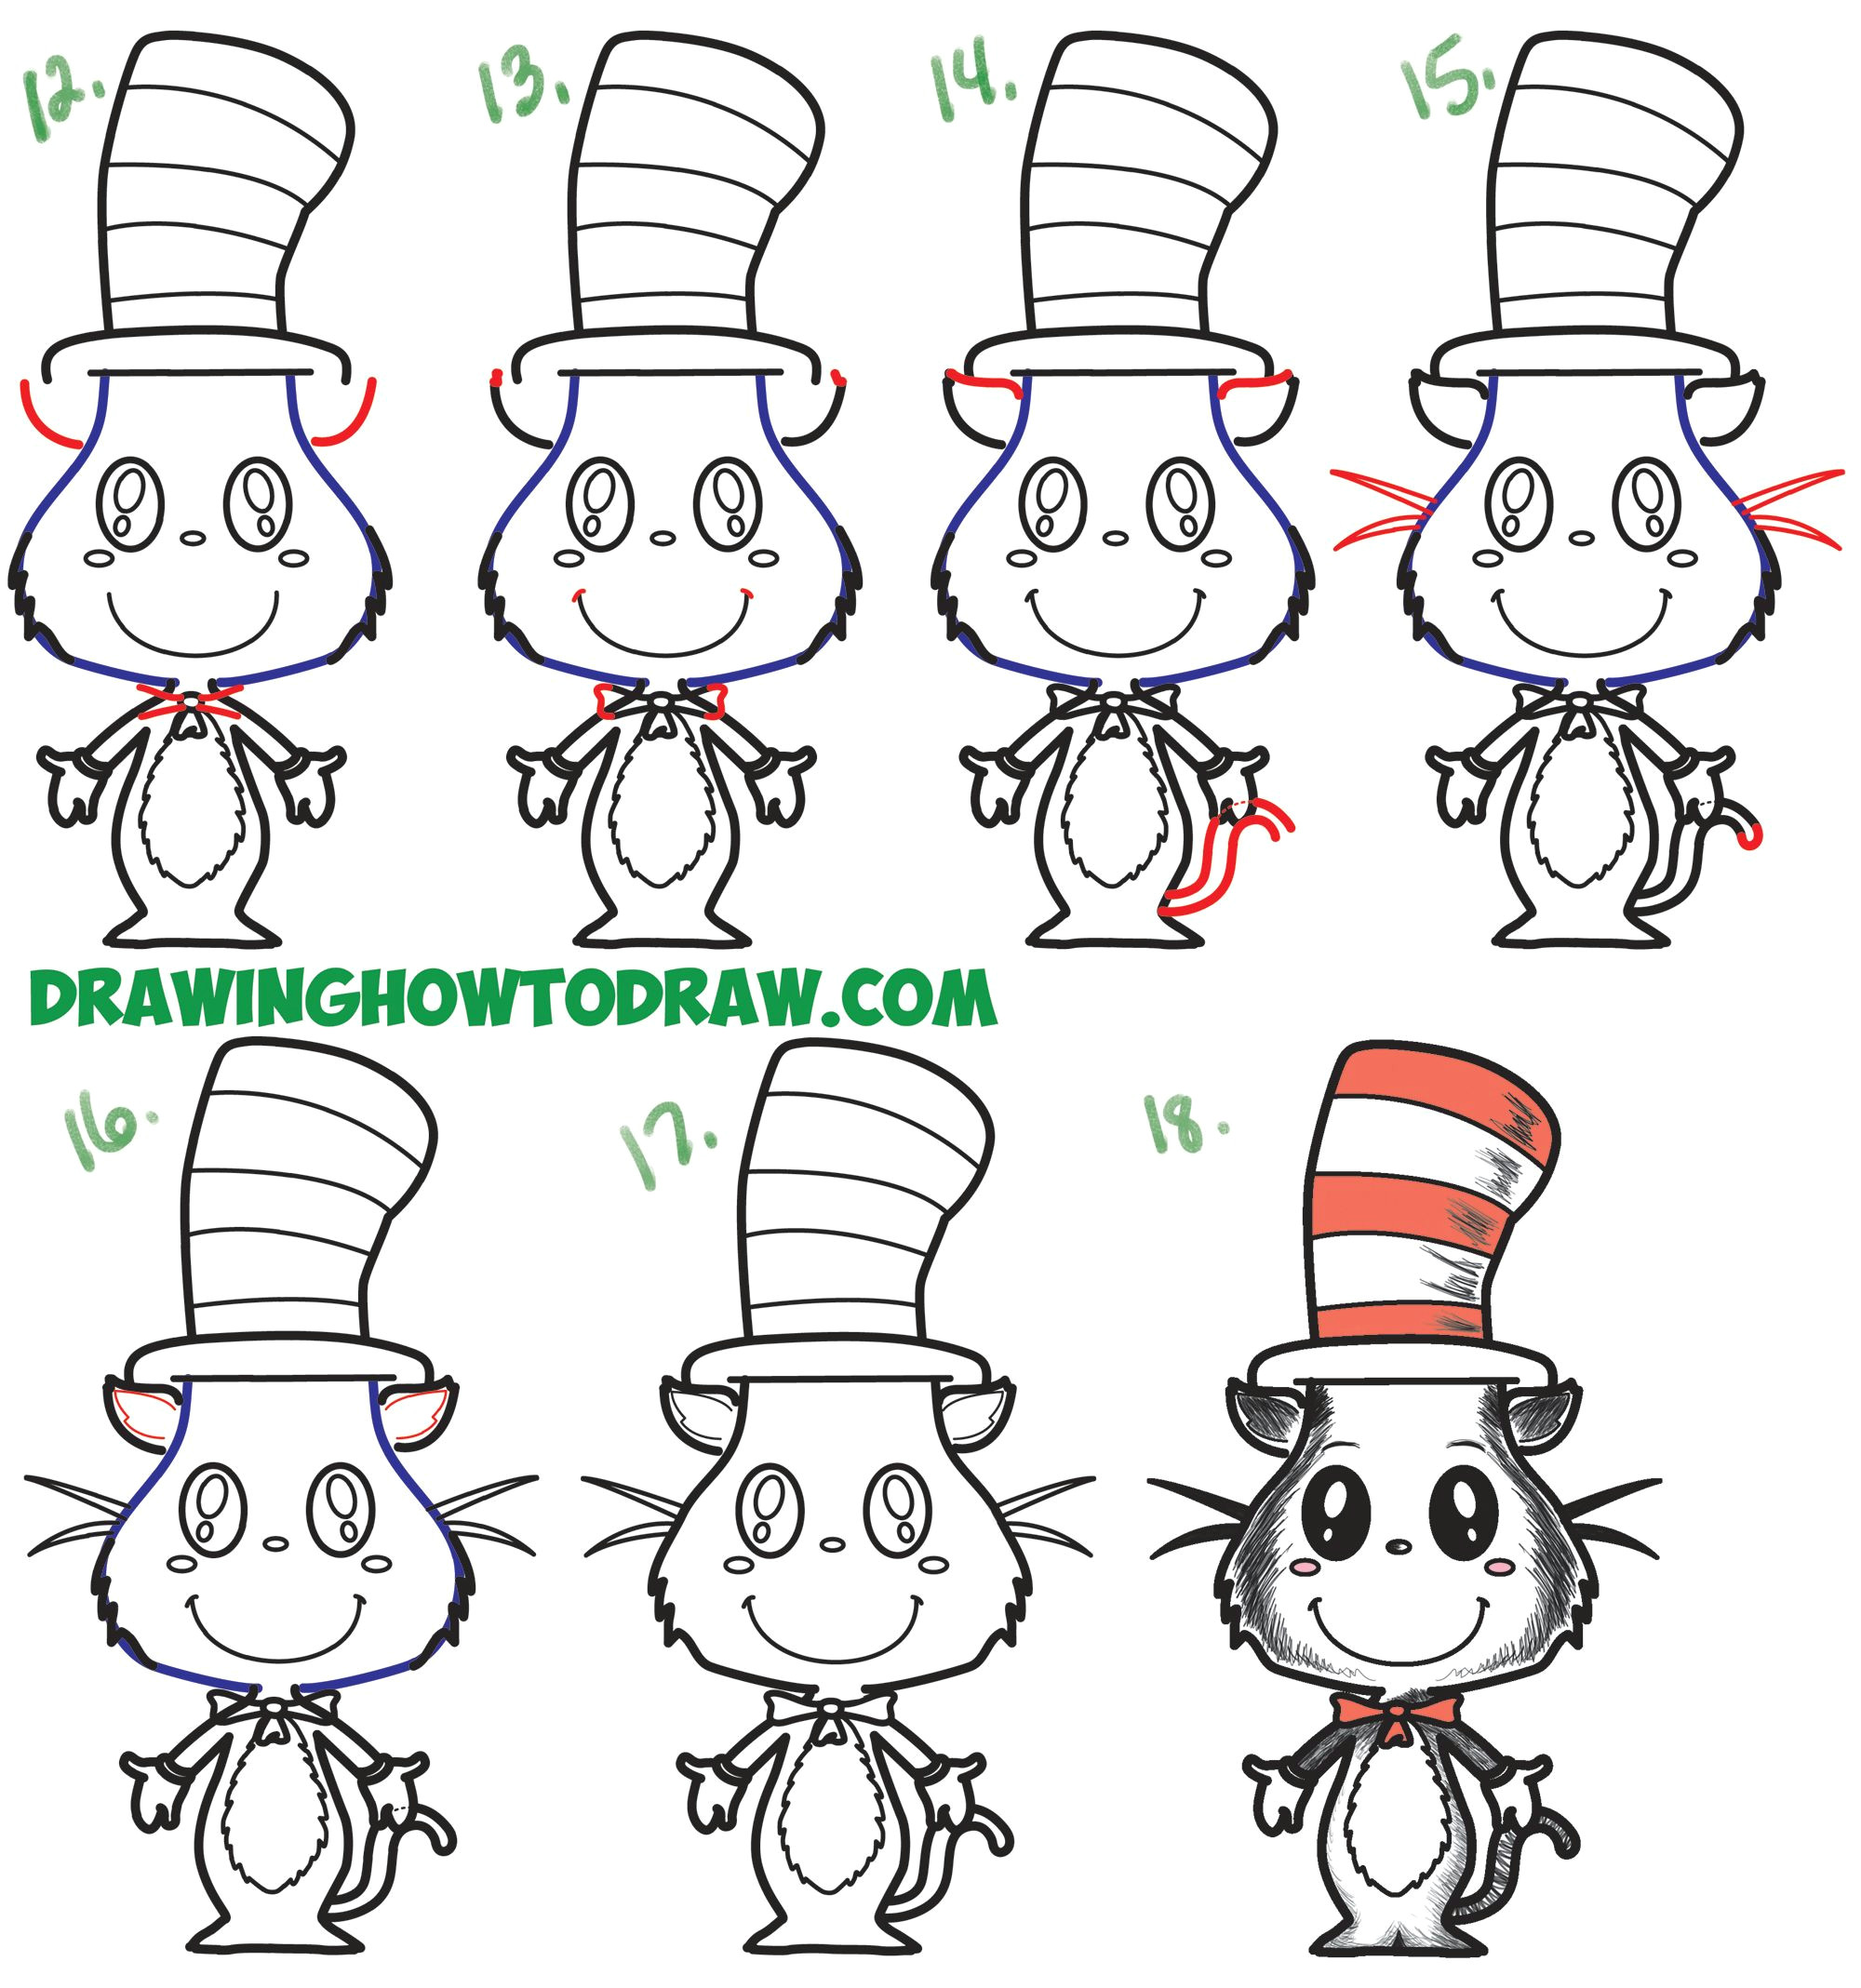 Cute Drawing Zebra How to Draw the Cat In the Hat Cute Kawaii Chibi Version Easy